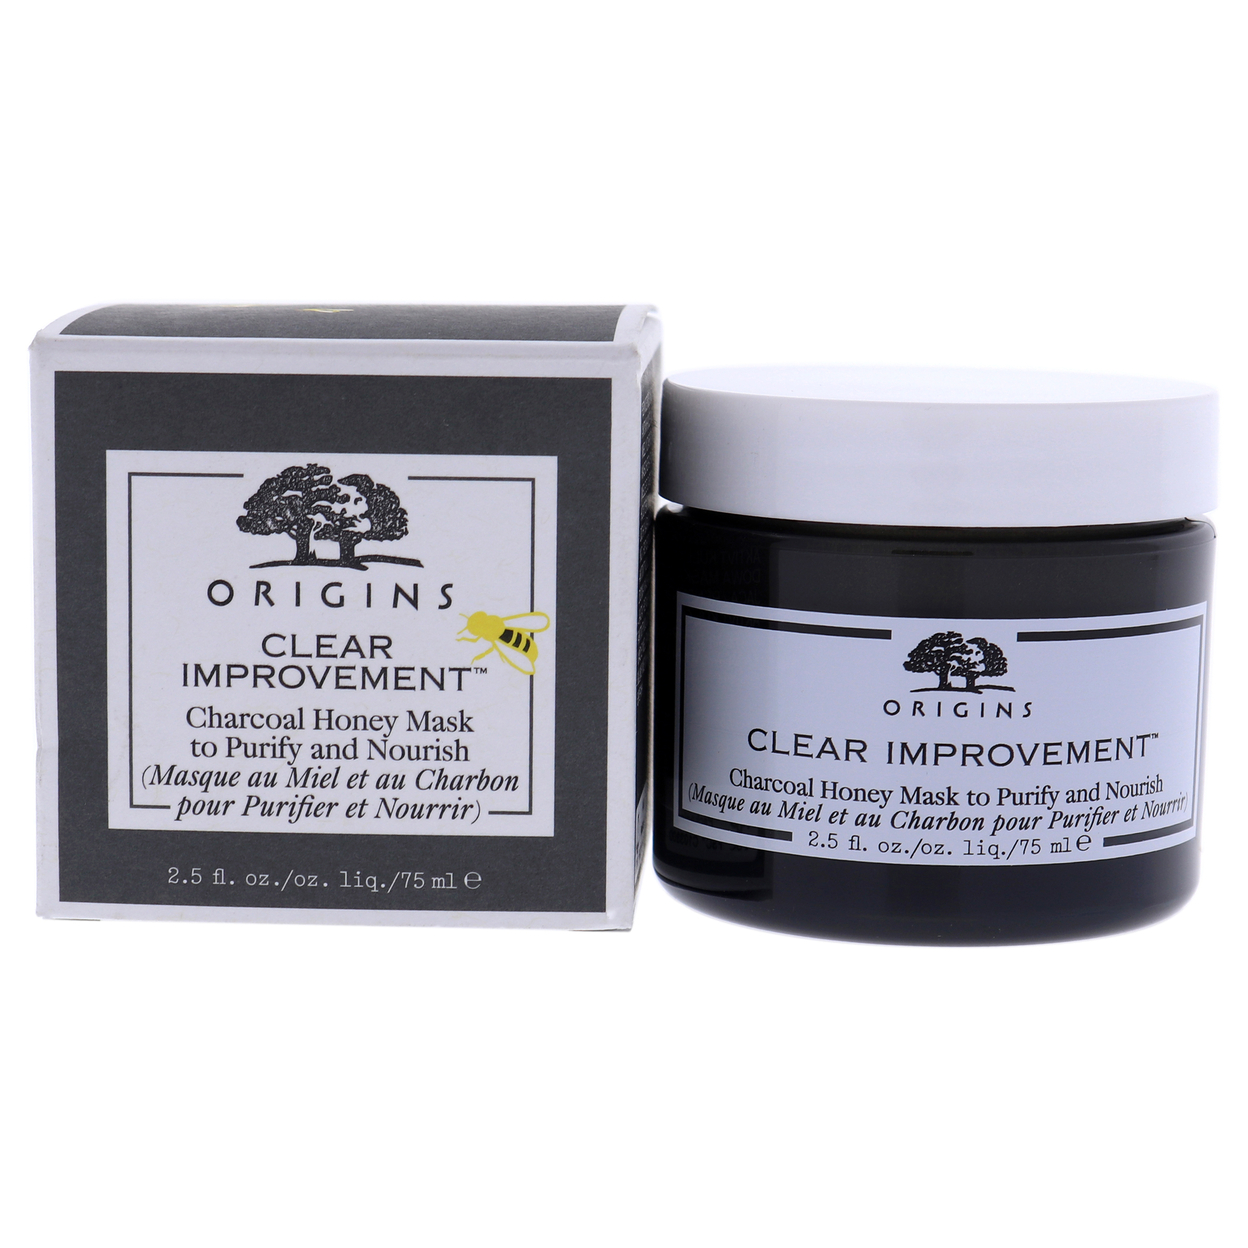 Origins Clear Improvement Charcoal Honey Mask To Purify And Nourish Mask 2.5 Oz